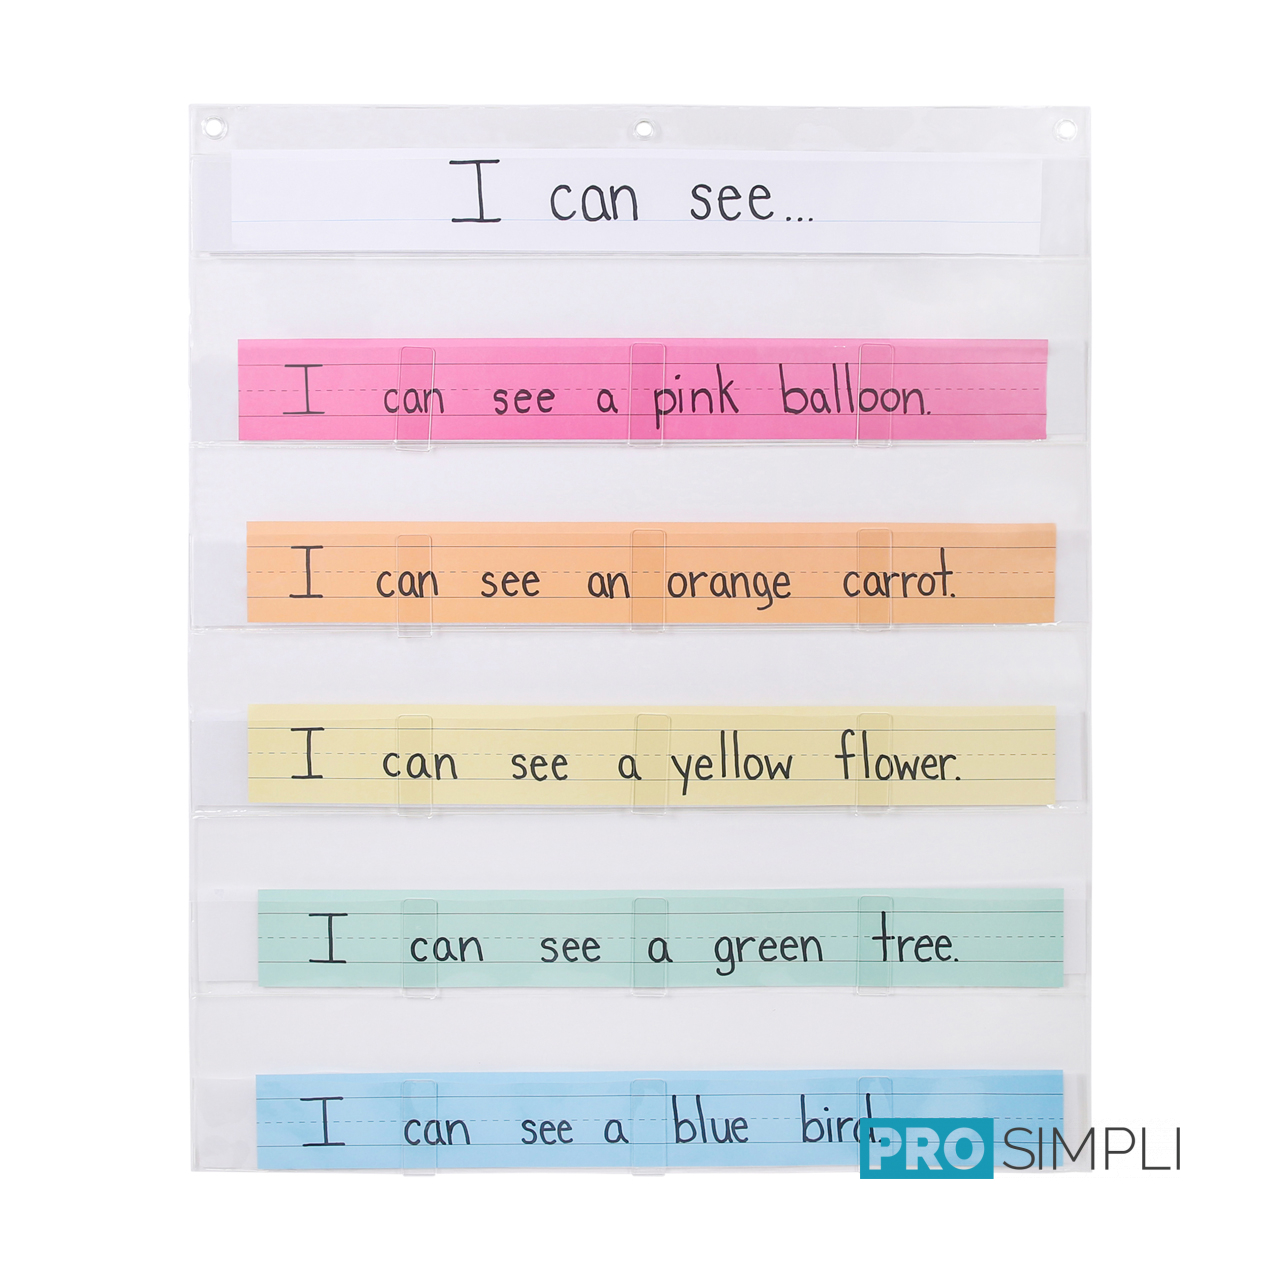 Use for Studying 4 Rows 3 Cols Classroom and Home Presentations Hang in the Office Tracking Workflow 12 Card Slots Self-Learning Organizing 14x16 ProSimpli 3 x 5 Index Card Holder Sleeve